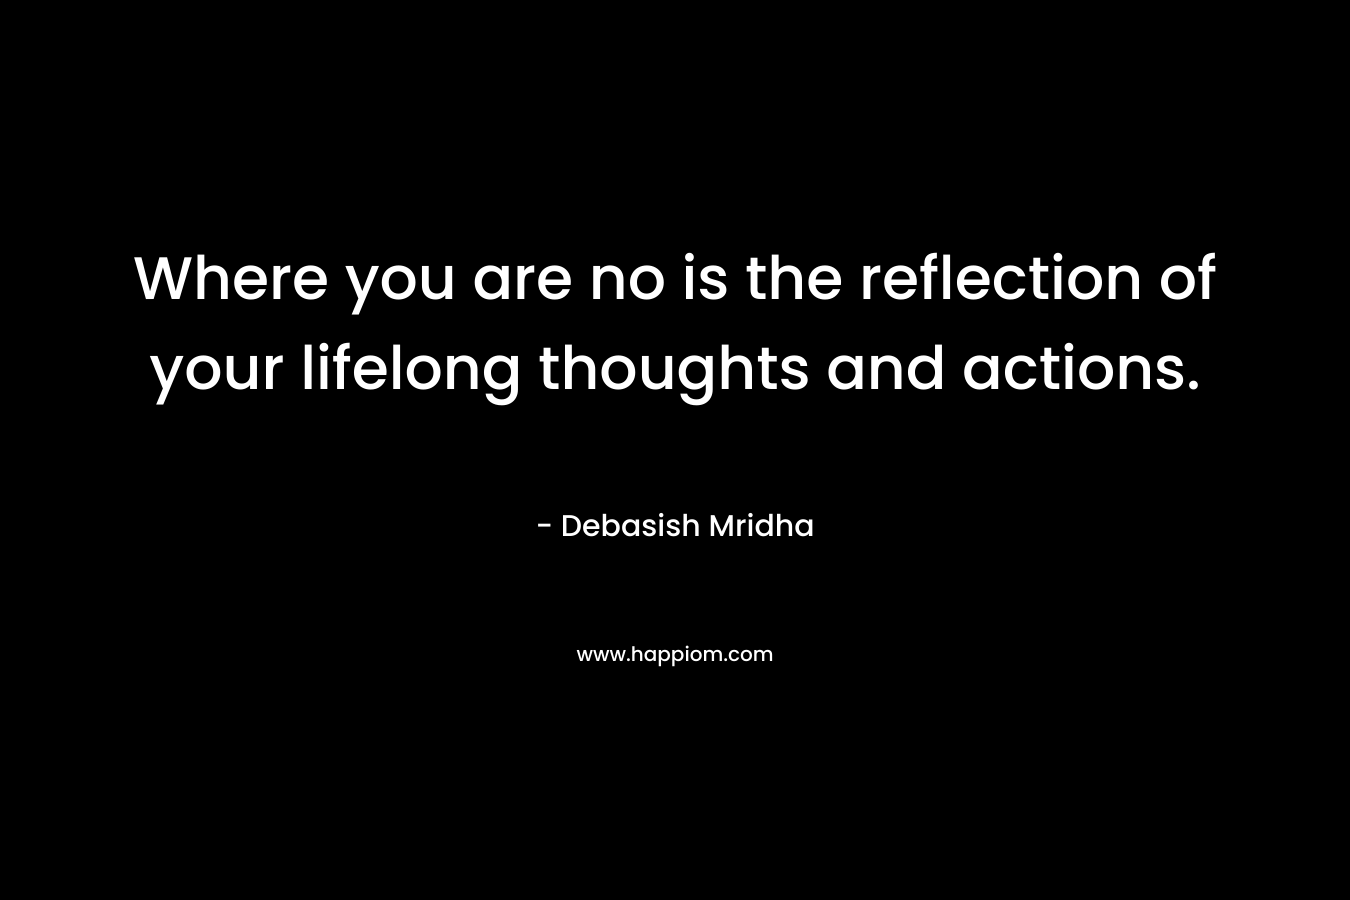 Where you are no is the reflection of your lifelong thoughts and actions.